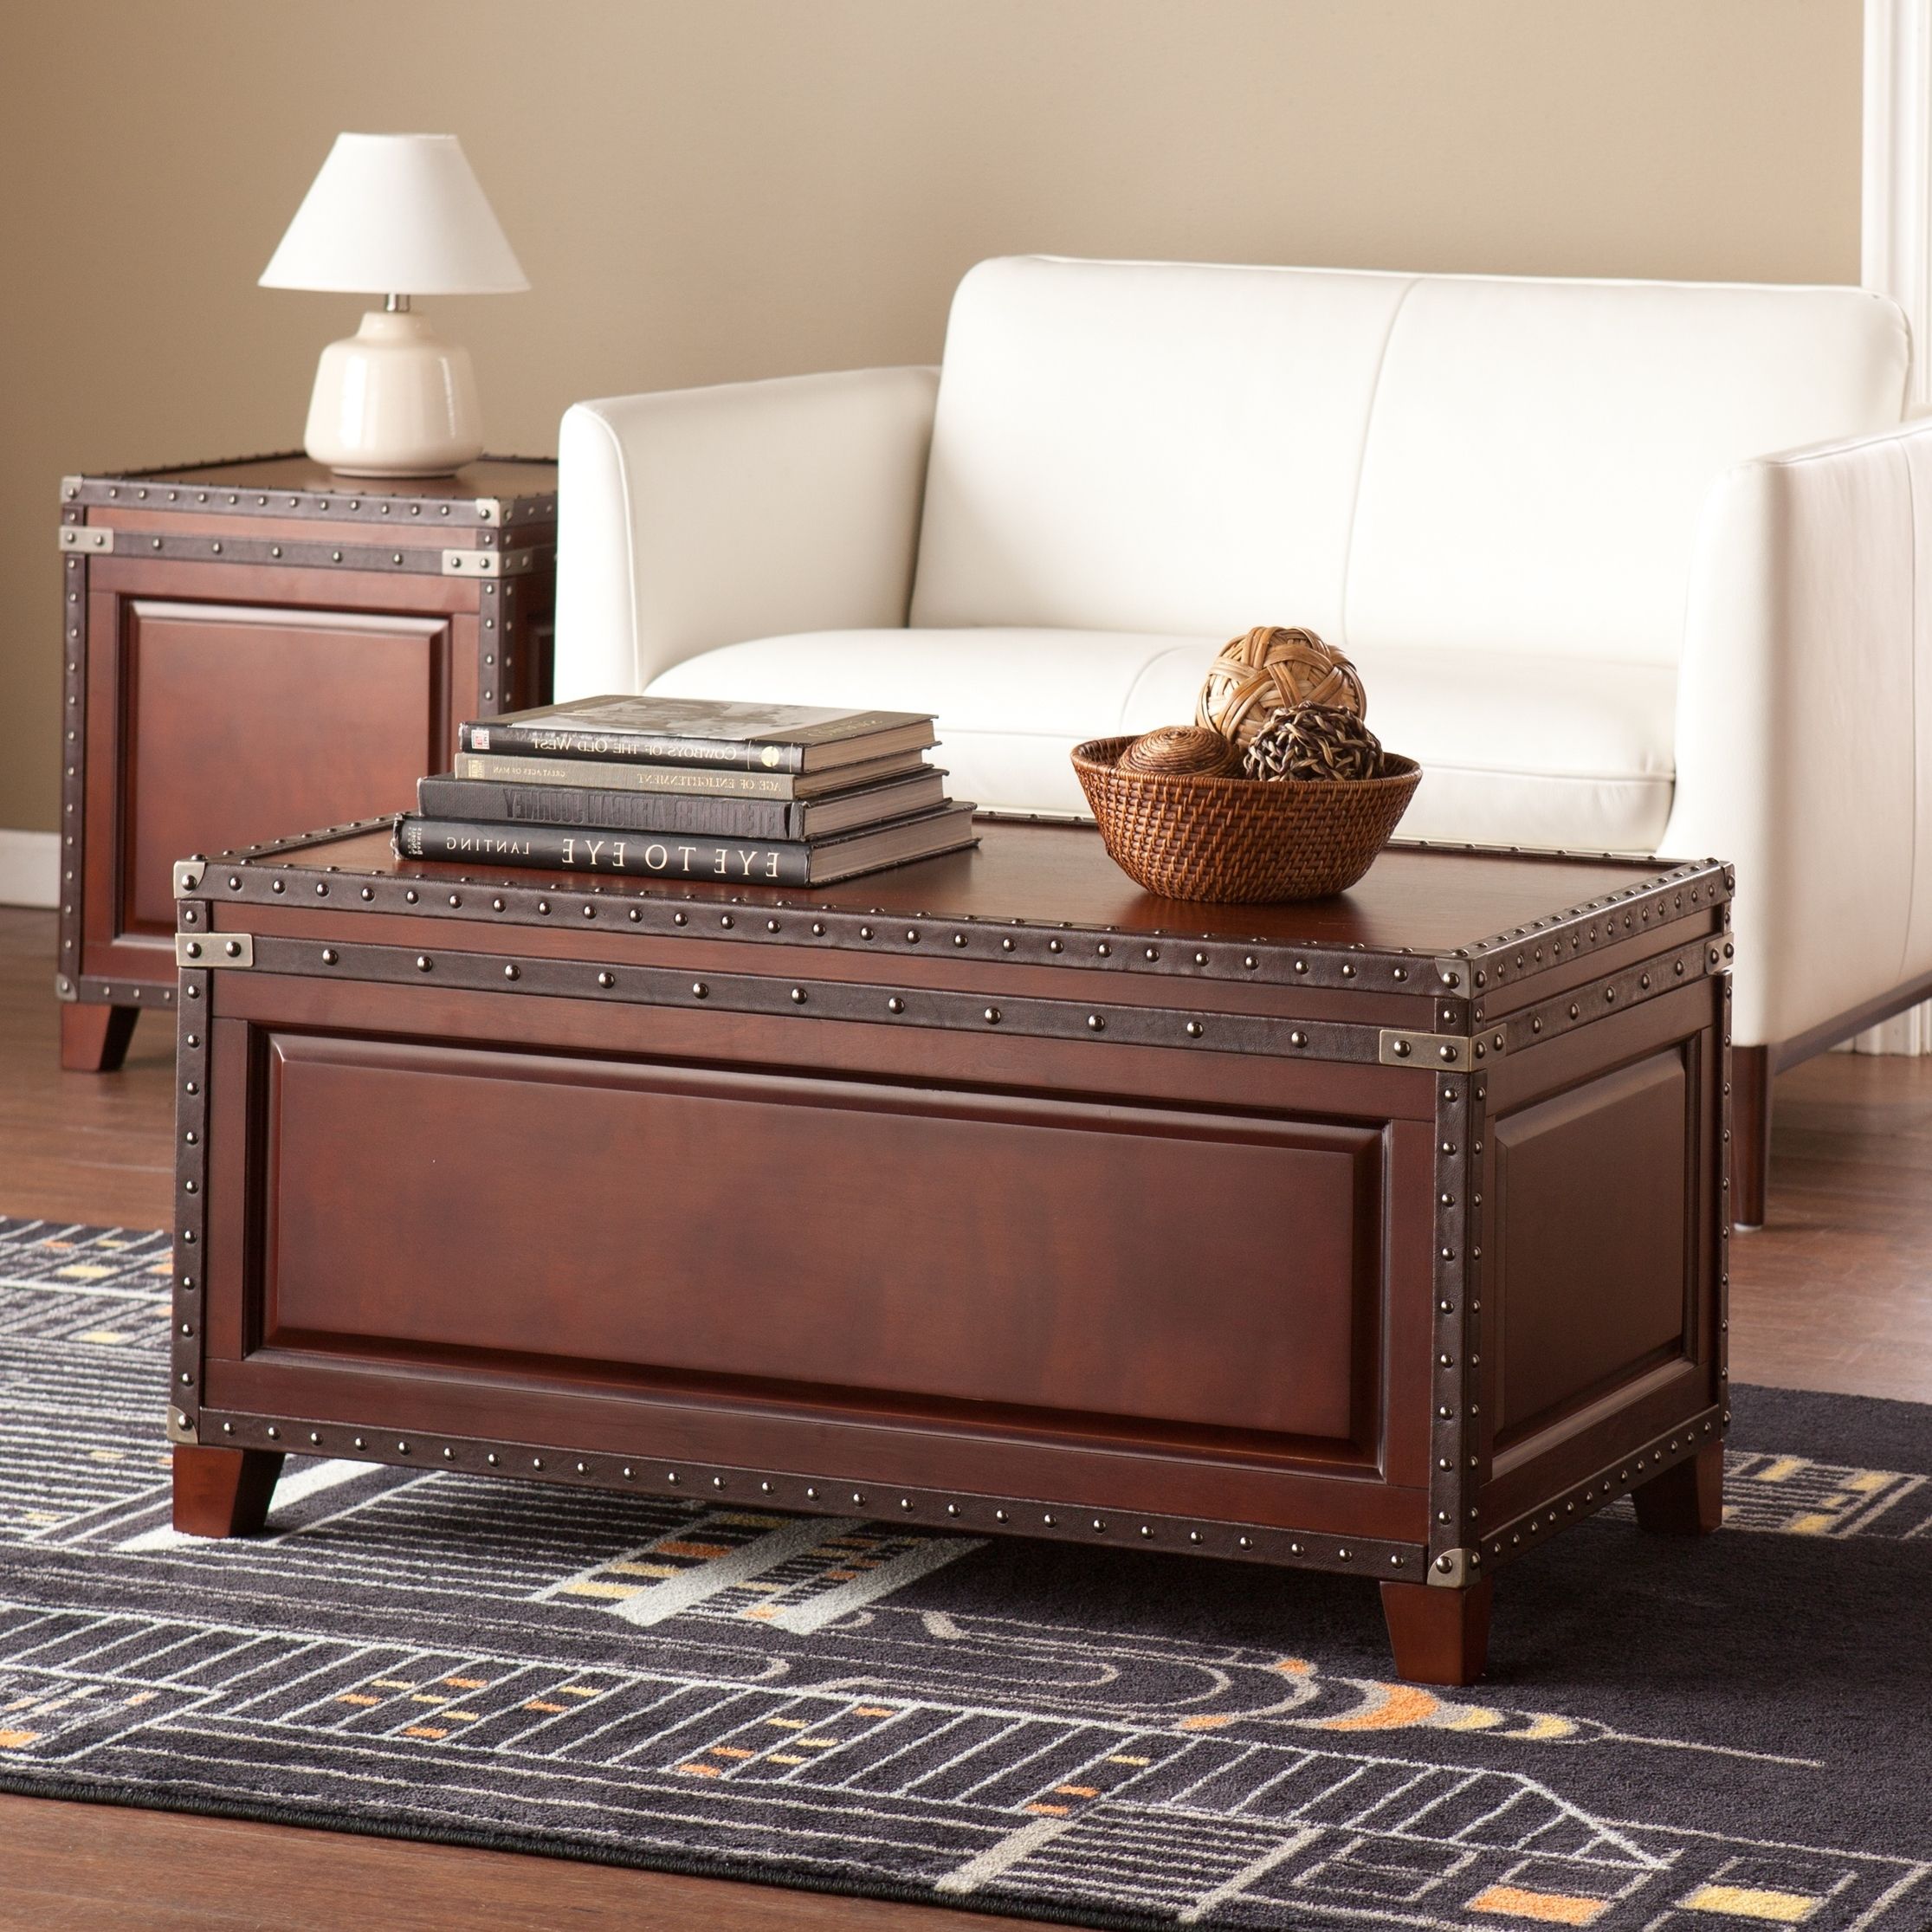 Walnut Wood Storage Trunk Cocktail Tables Within Fashionable Coffee Table With Storage Trunk Chest Hidden Bin Leather (View 6 of 20)